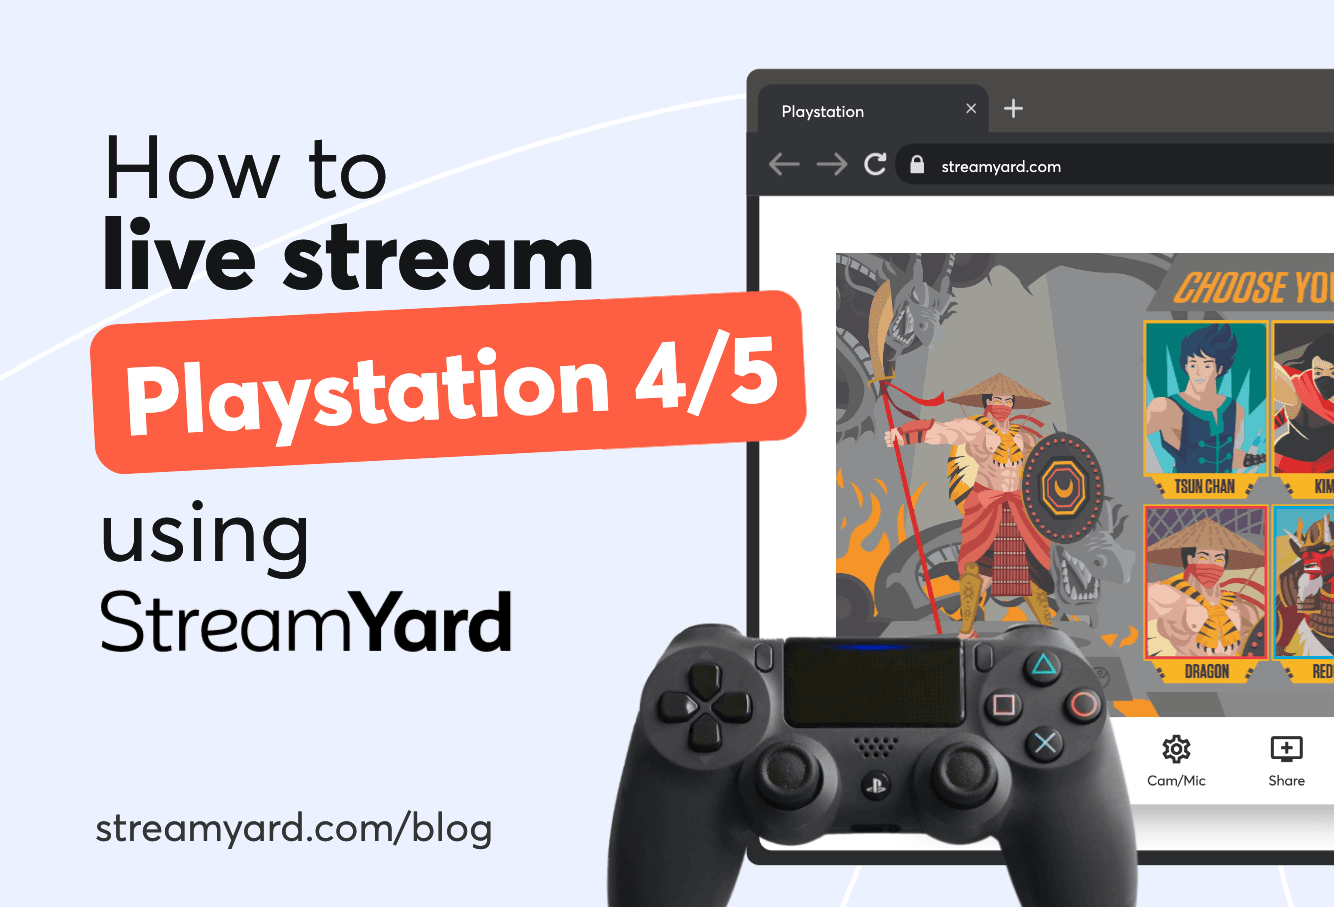 Take your gameplay beyond your PS 4 / 5 console. Check out this easy guide on how to live stream PlayStation using StreamYard.